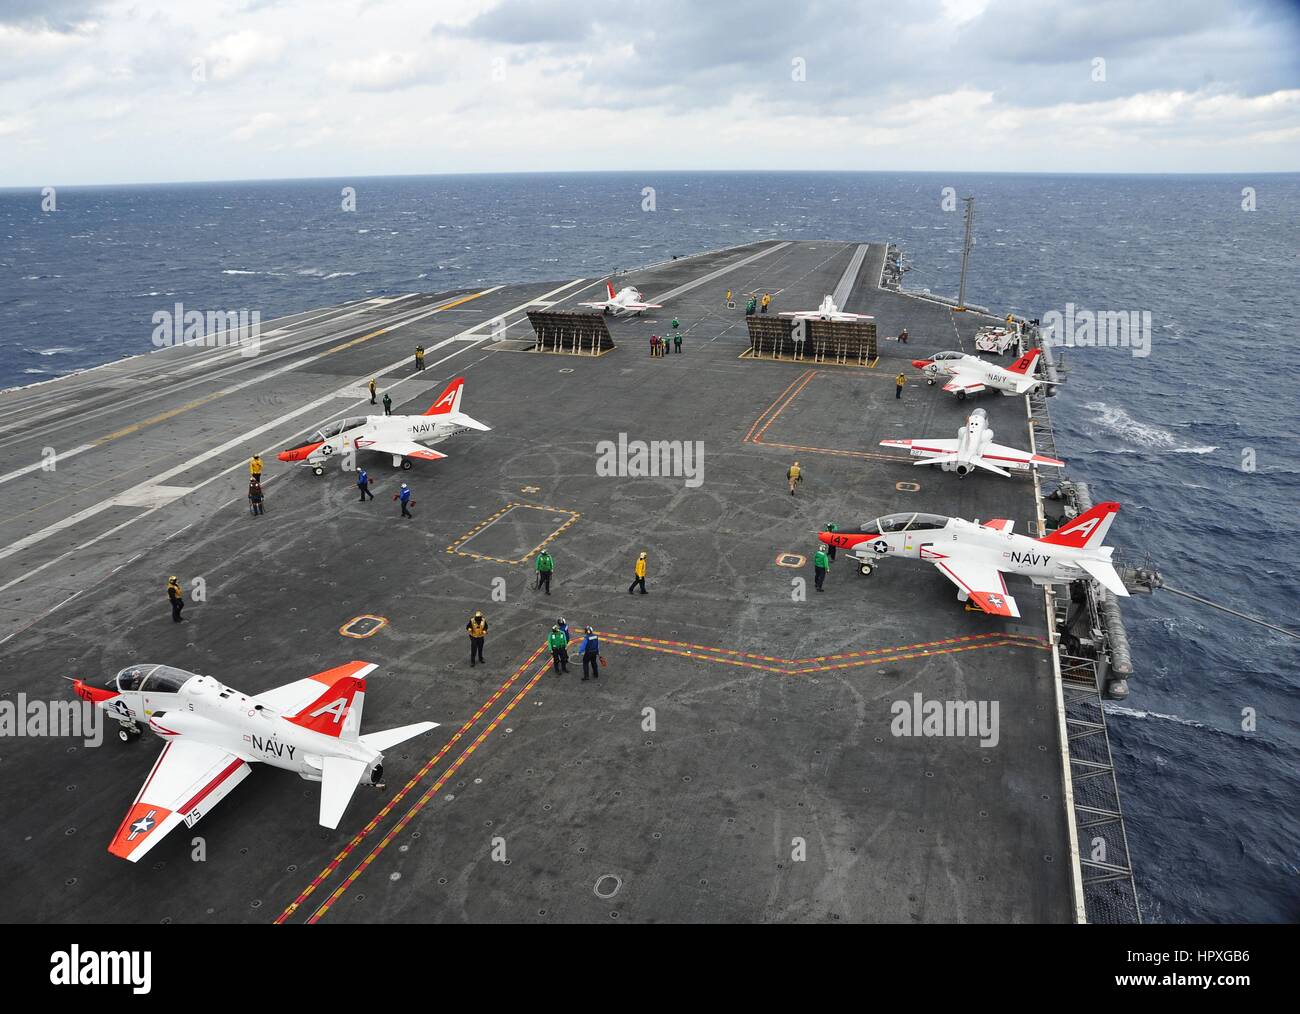 Three aircrafts prepare to launch of off of the flight deck of the aircraft carrier USS Harry S. Truman, underway supporting carrier qualifications, November 6, 2012. Image courtesy Anthony Presley/US Navy. Stock Photo